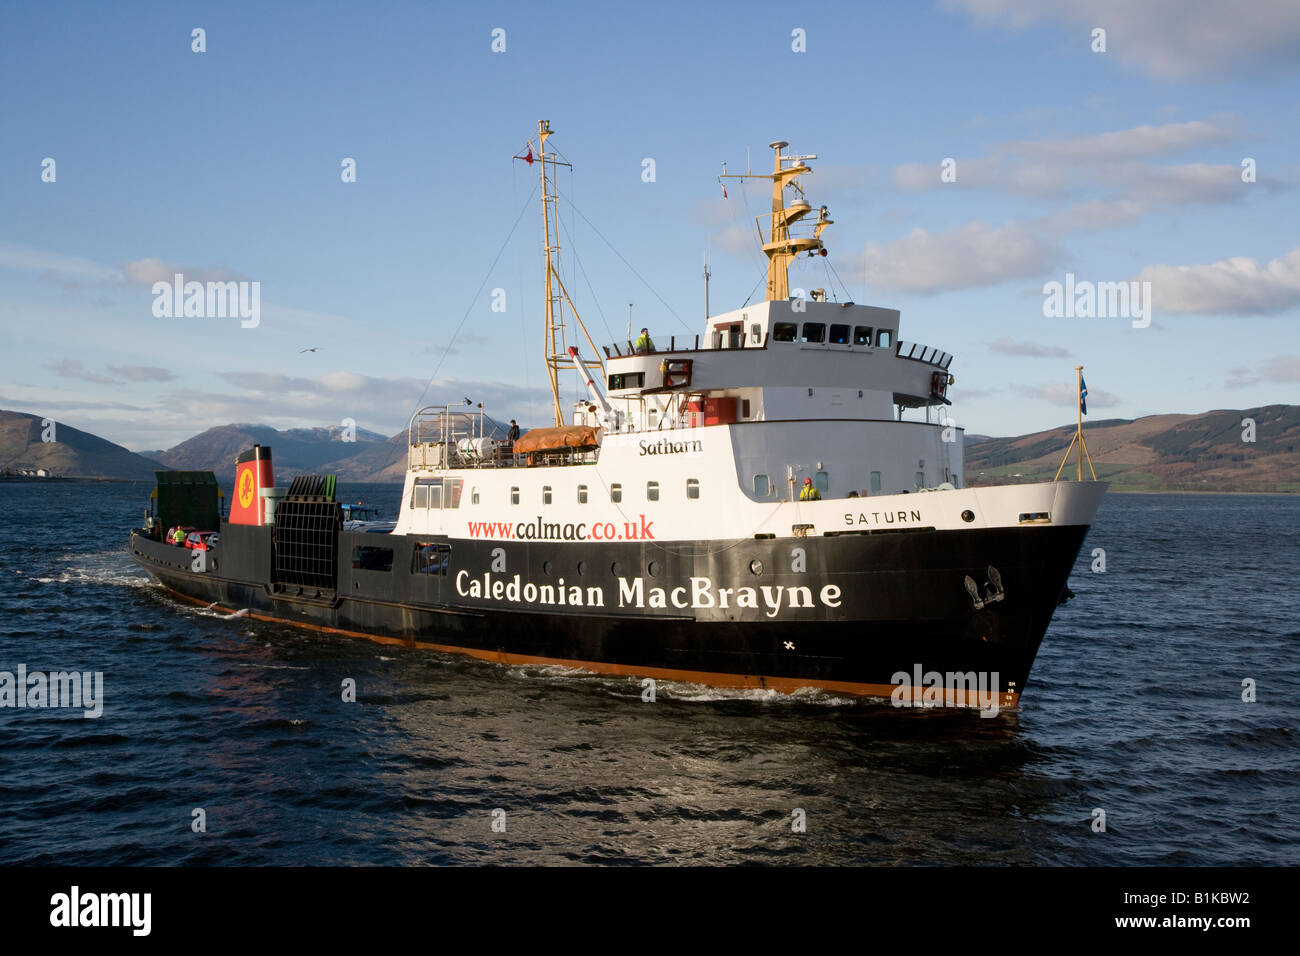 Caledonian MacBrayne ferry MV Saturn arriving at Rothesay pier Isle of Bute Stock Photo